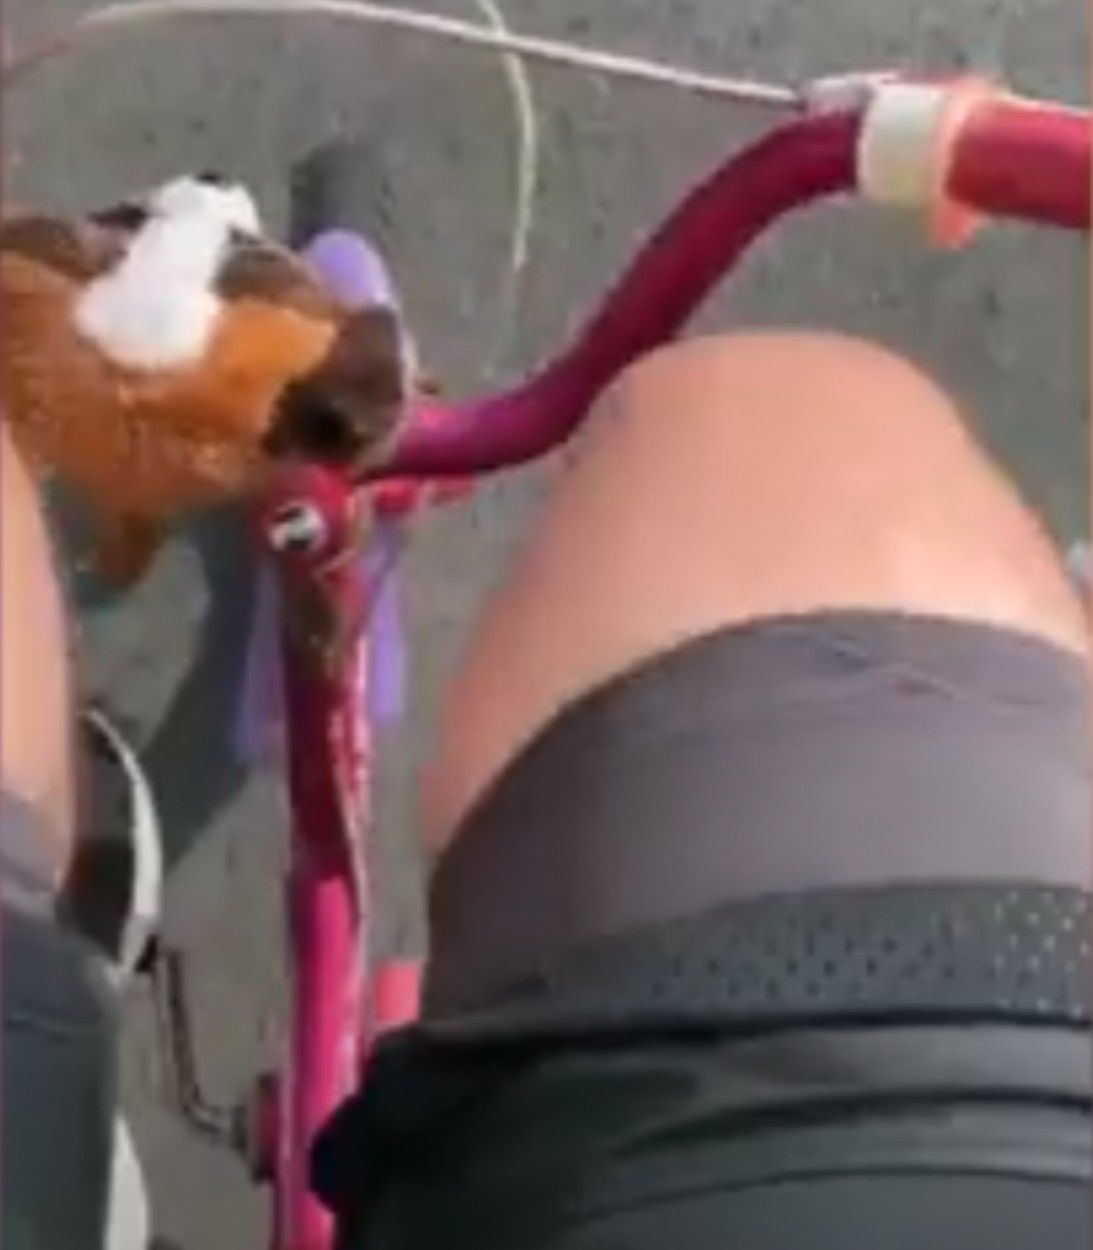 Screenshot of YouTube video showing a dad who rode 200 miles for charity on pink bike